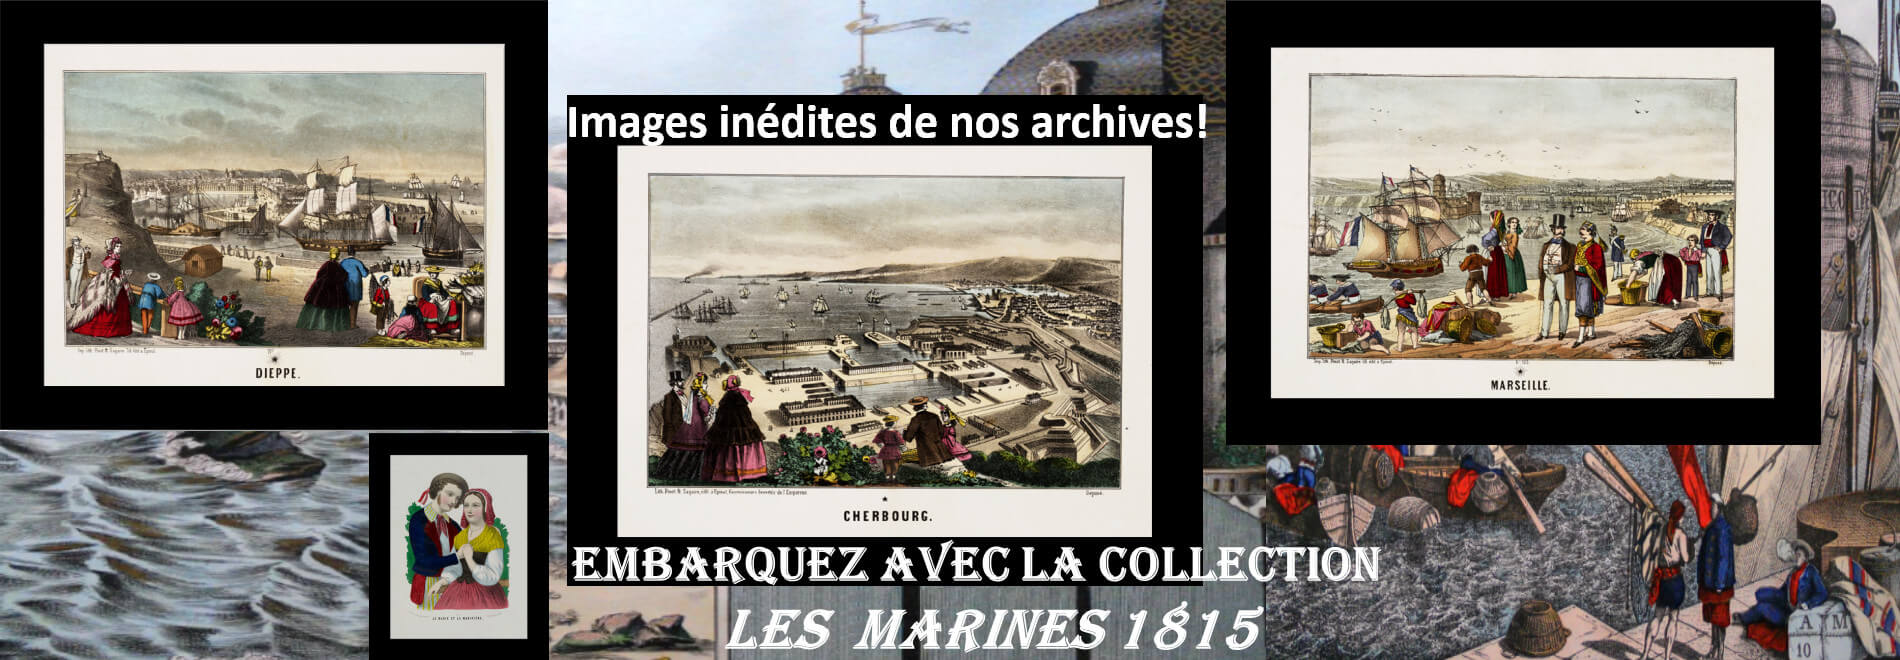 banner les Marines collection